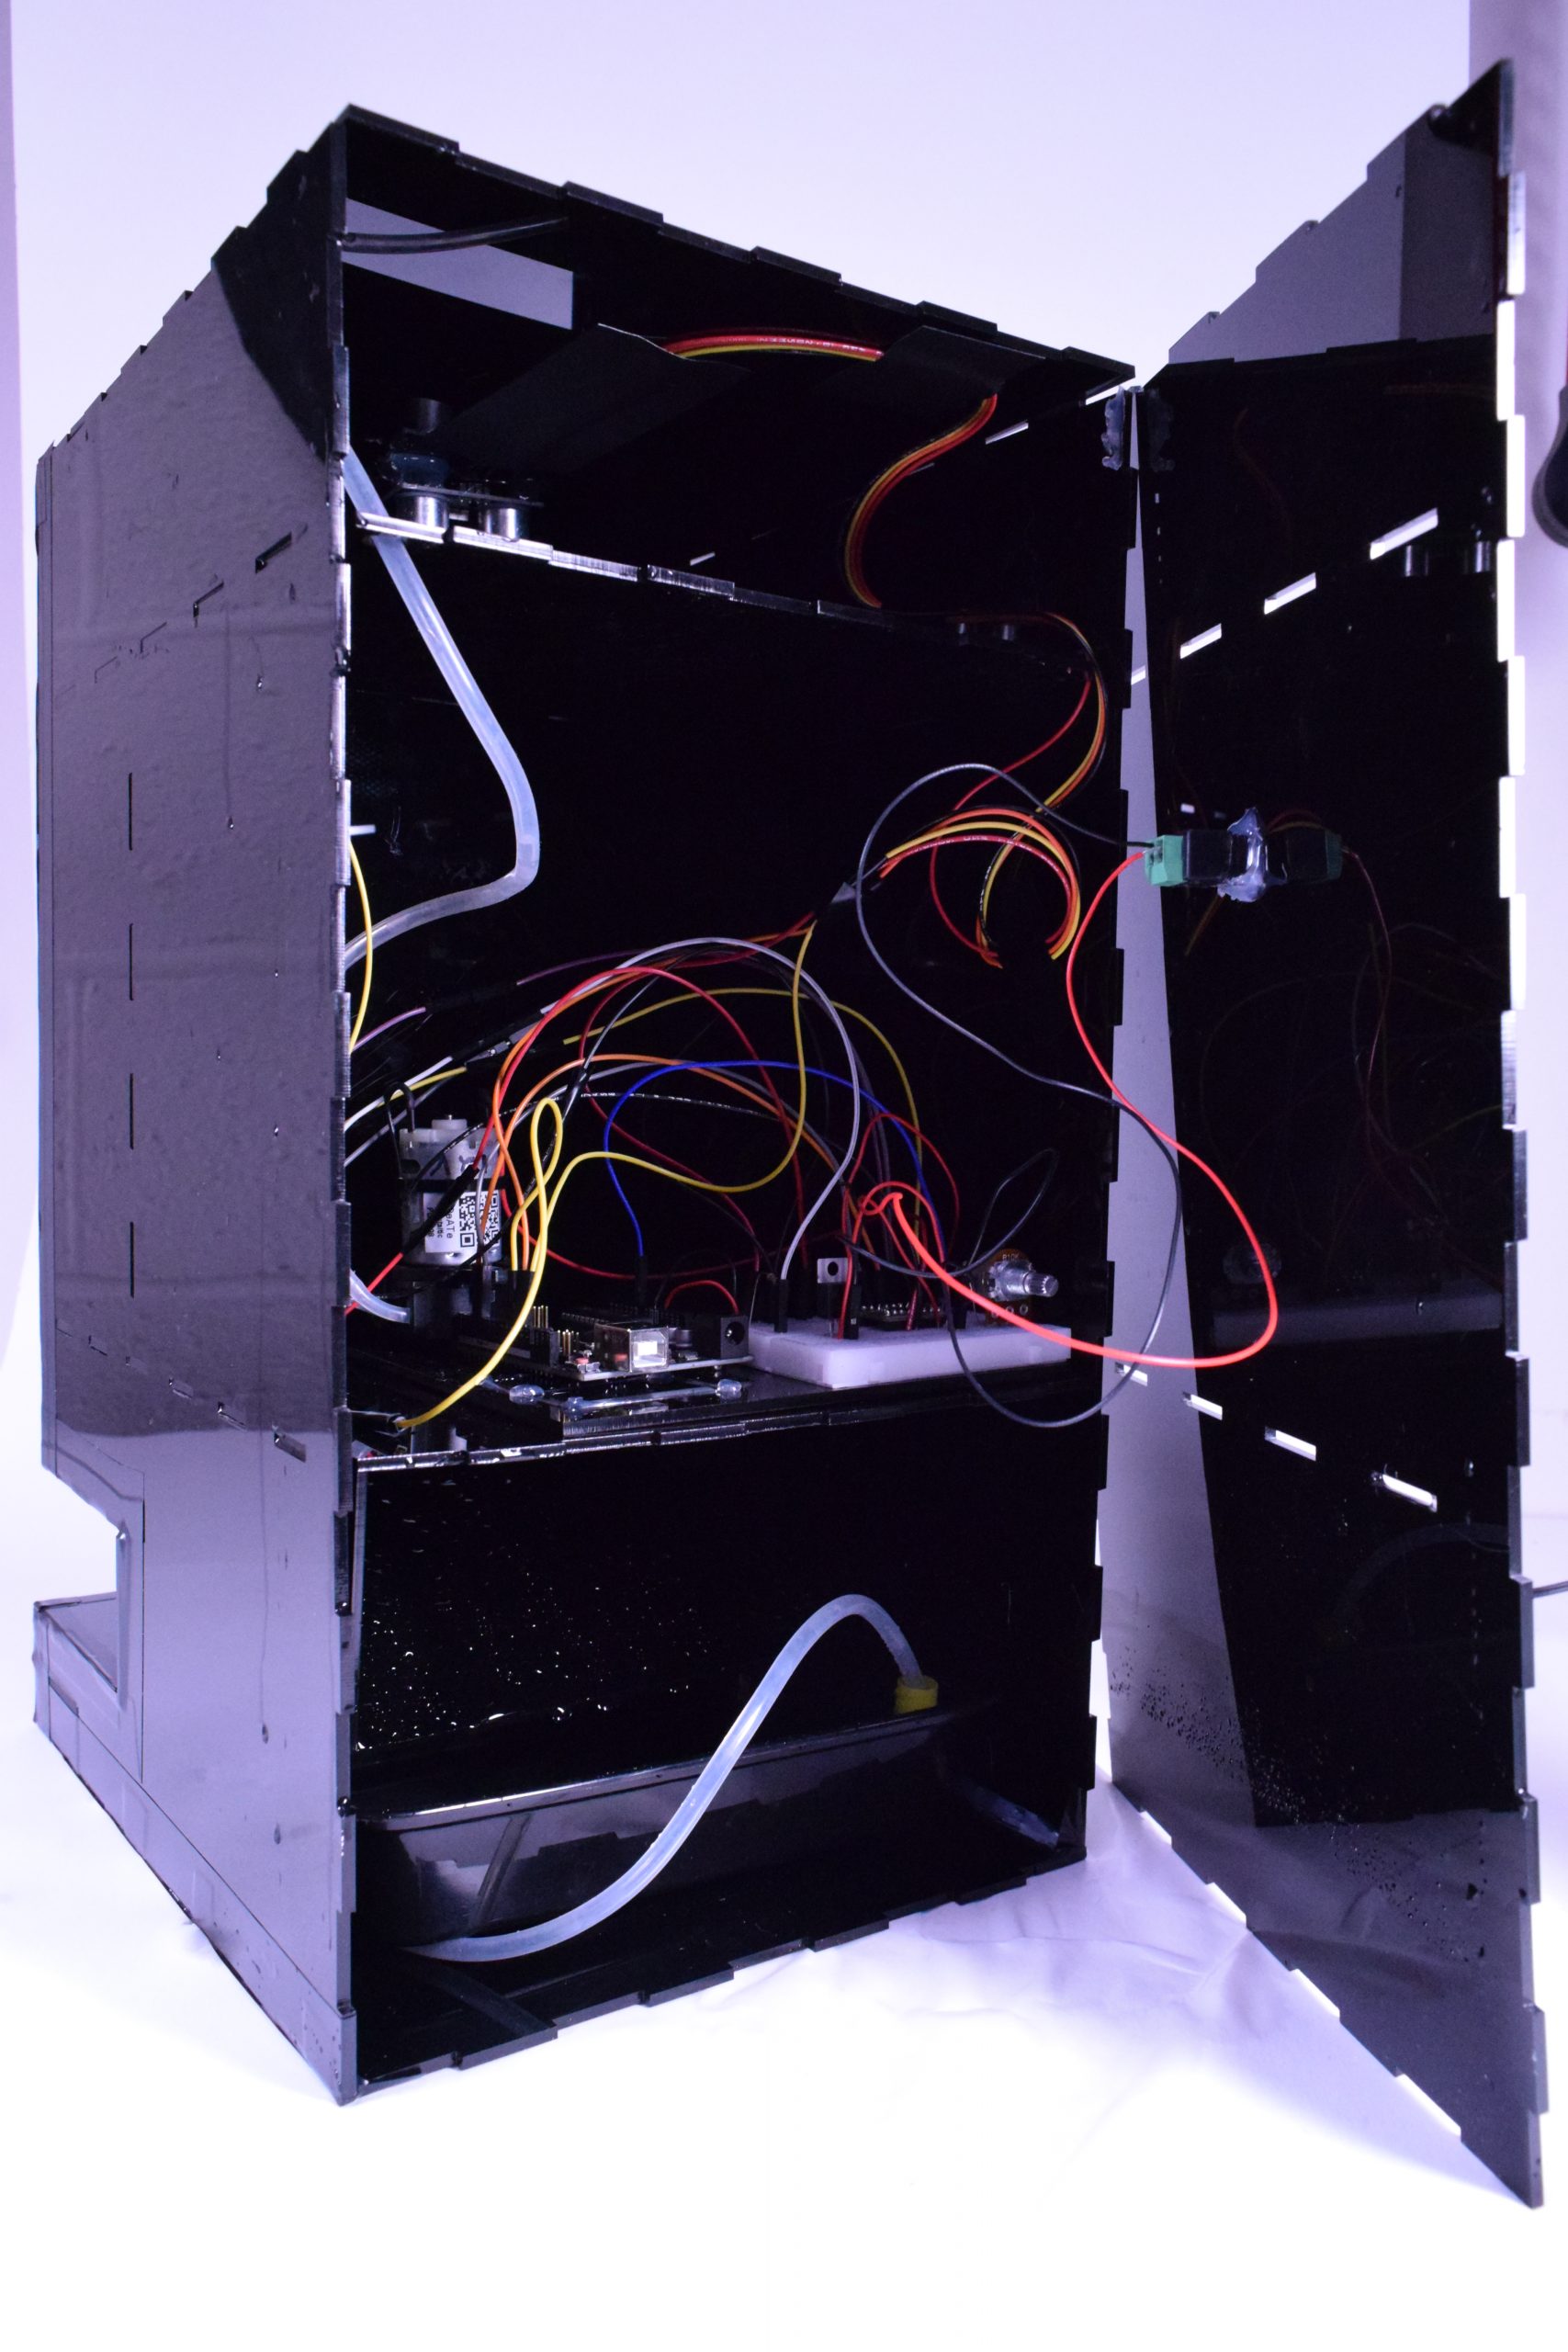 Back view of the fountain box with back panel hinged open, revealing circuits, tubes, and water containers inside.